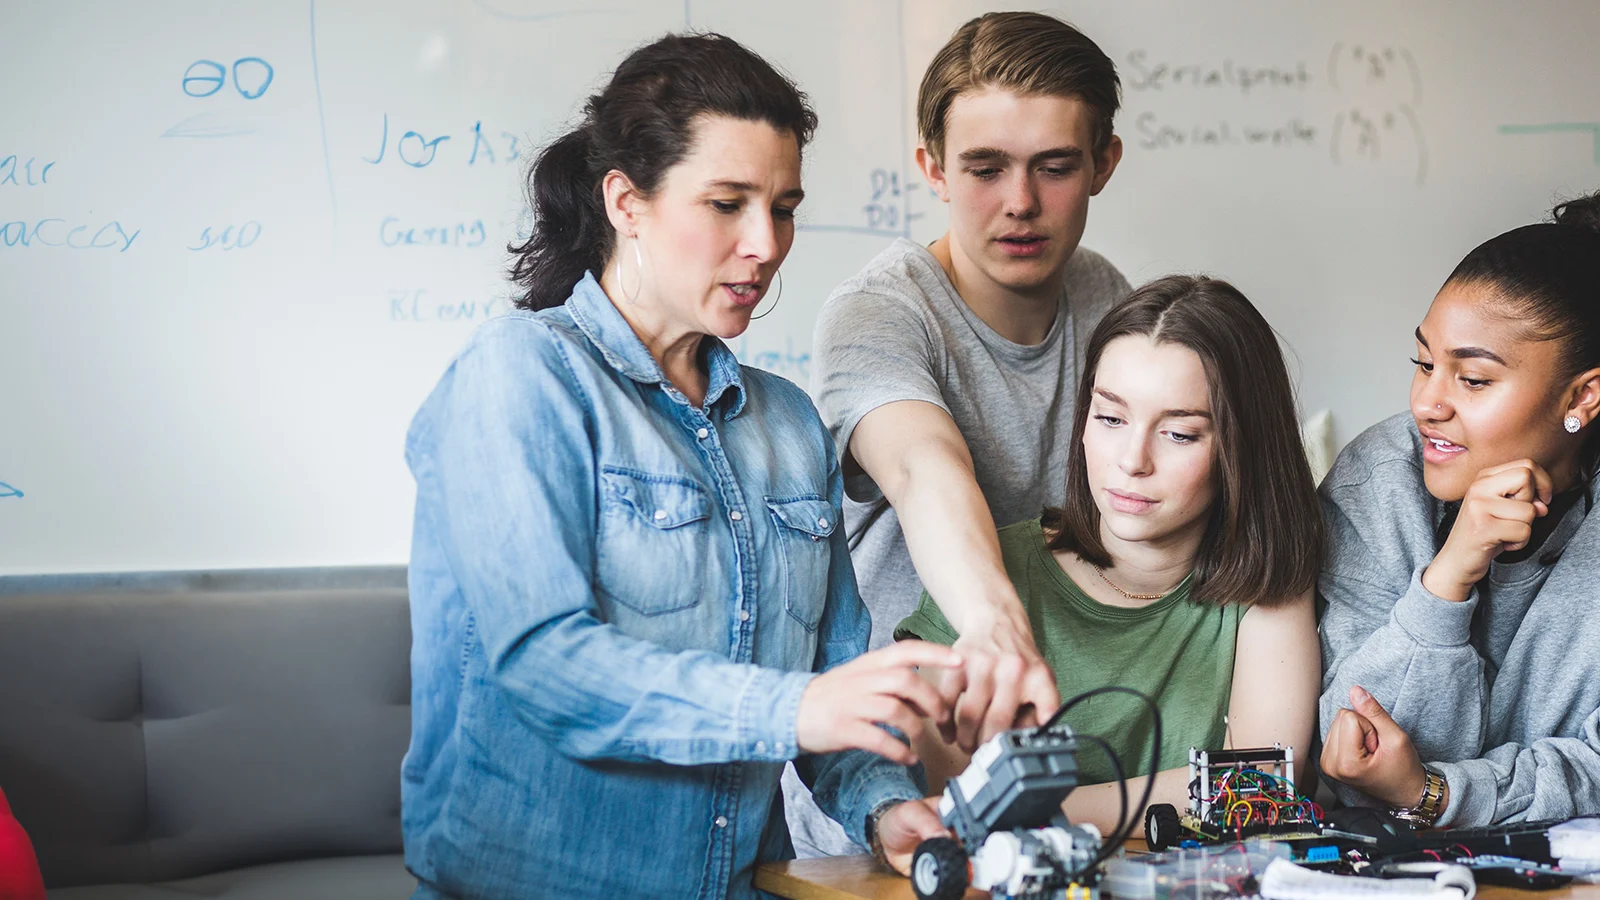 Teacher examining robot with students